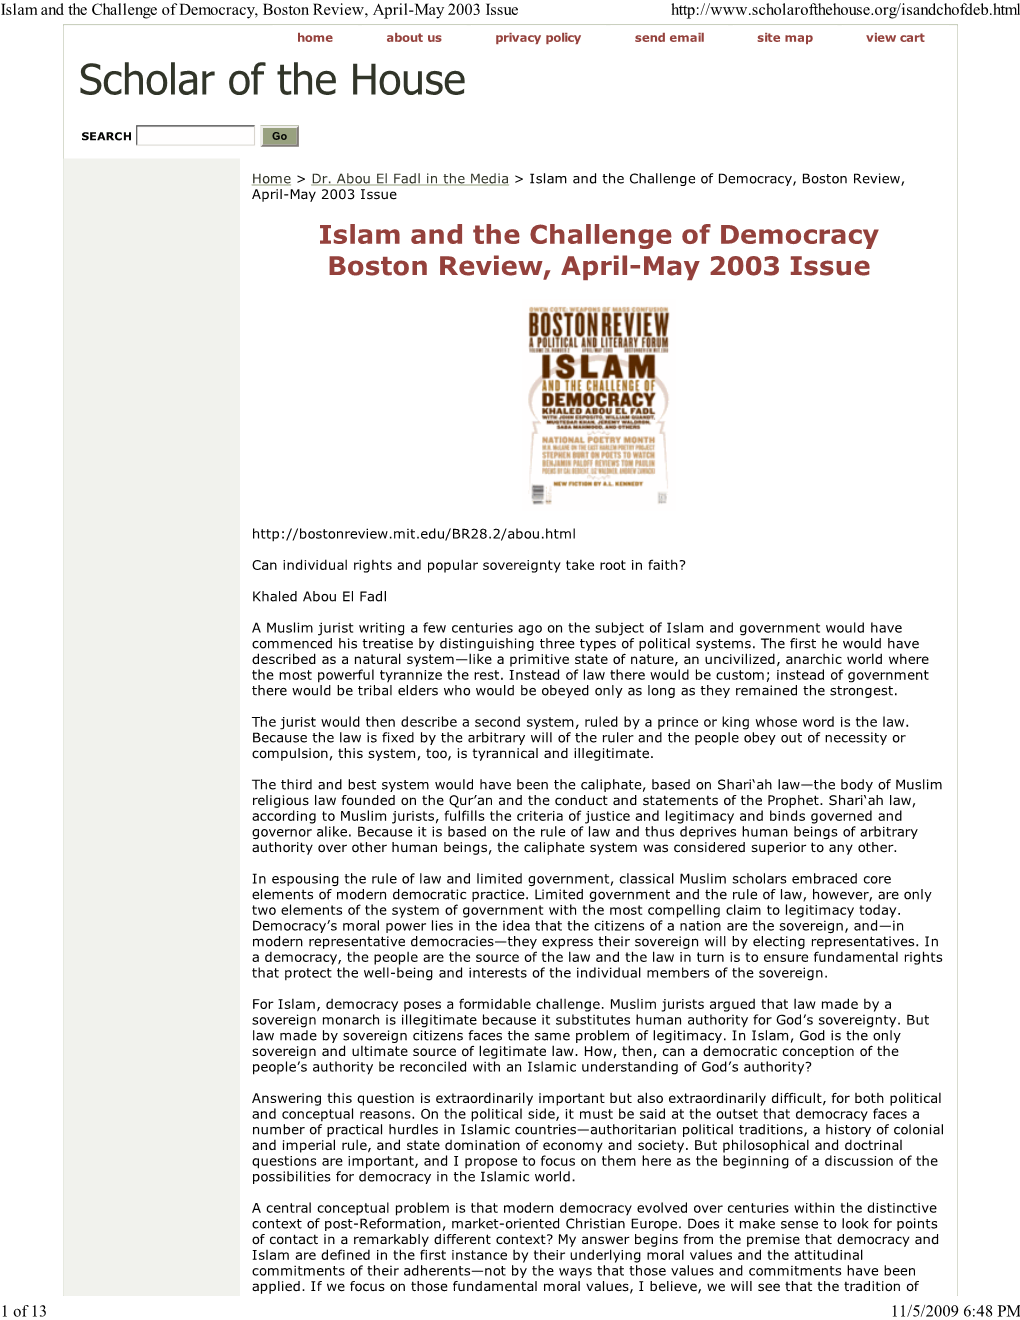 Islam and the Challenge of Democracy, Boston Review, April-May 2003 Issue